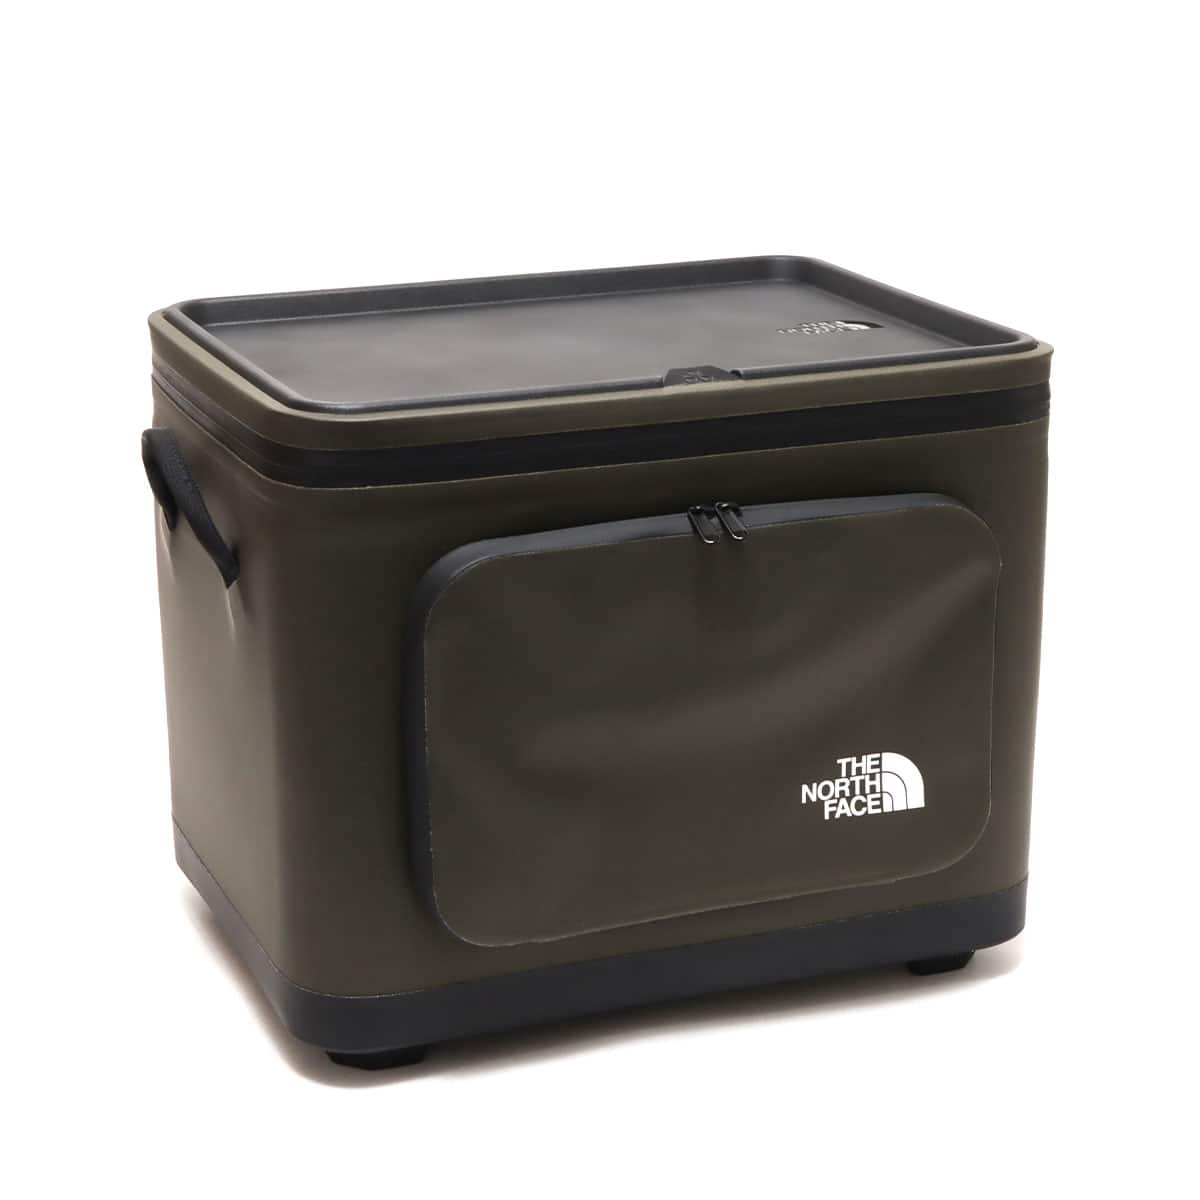 THE NORTH FACE FIELUDENS GEAR CONTAINER NEWTAUPEGREEN 22SS-I